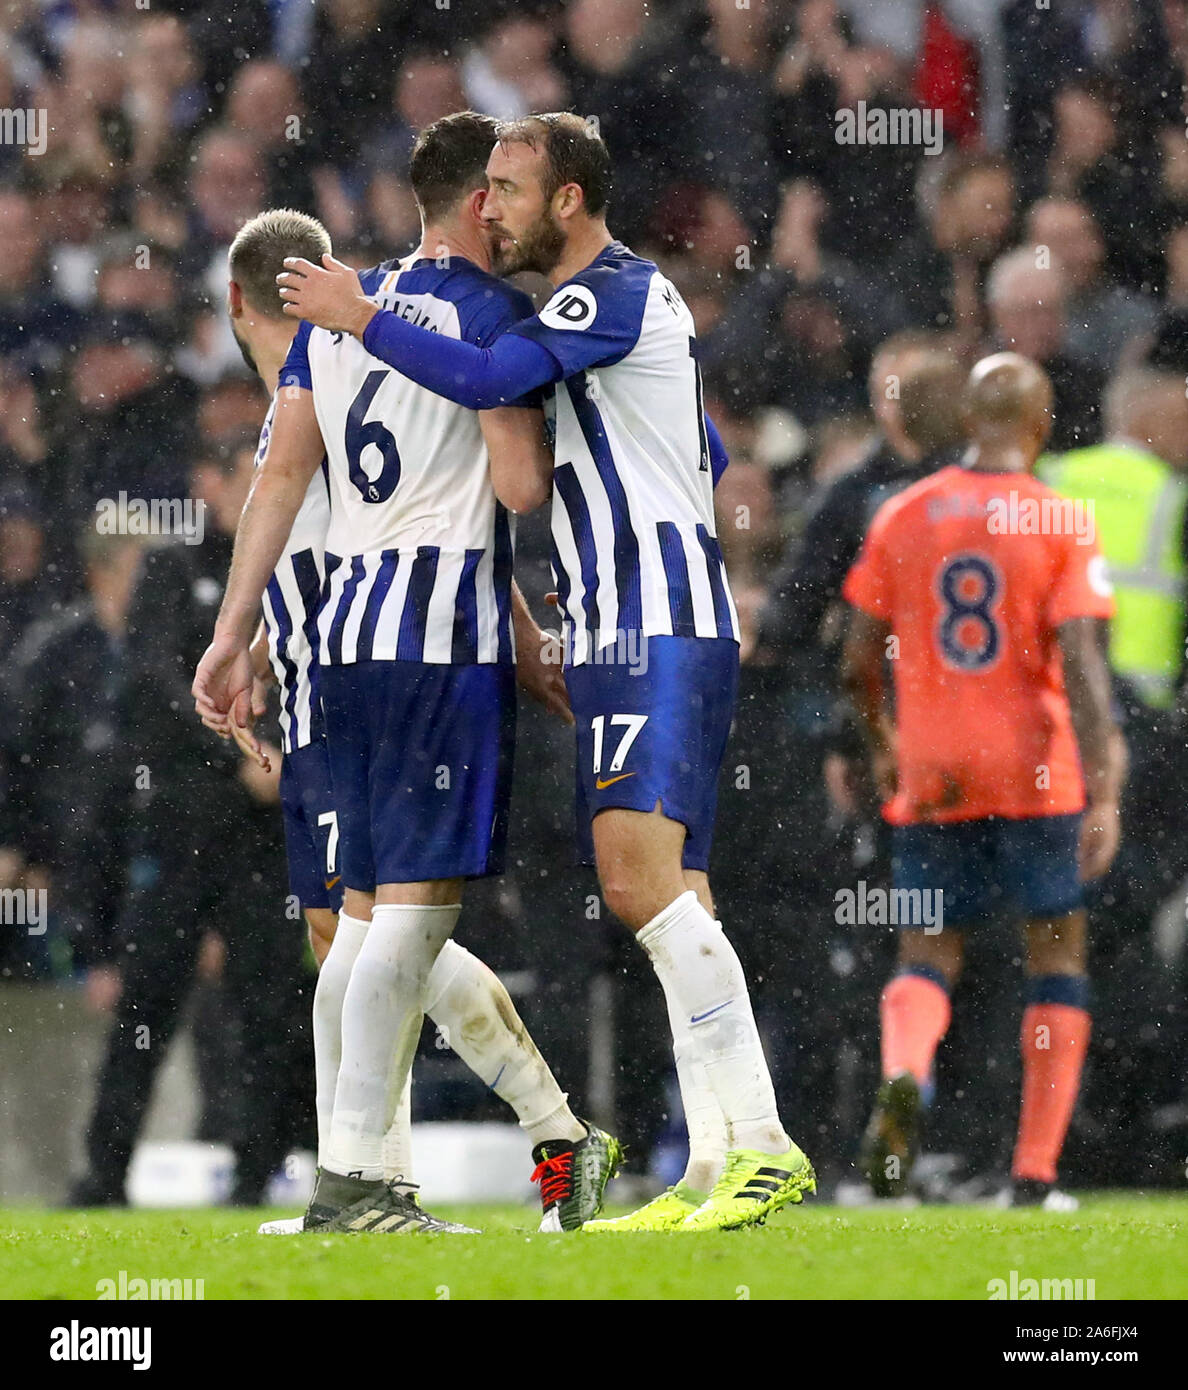 Brighton and Hove Albion's Dale Stephens and Brighton and Hove Albion's Glenn Murray celebrate after the final whistle during the Premier League match at the AMEX Stadium, Brighton. Stock Photo